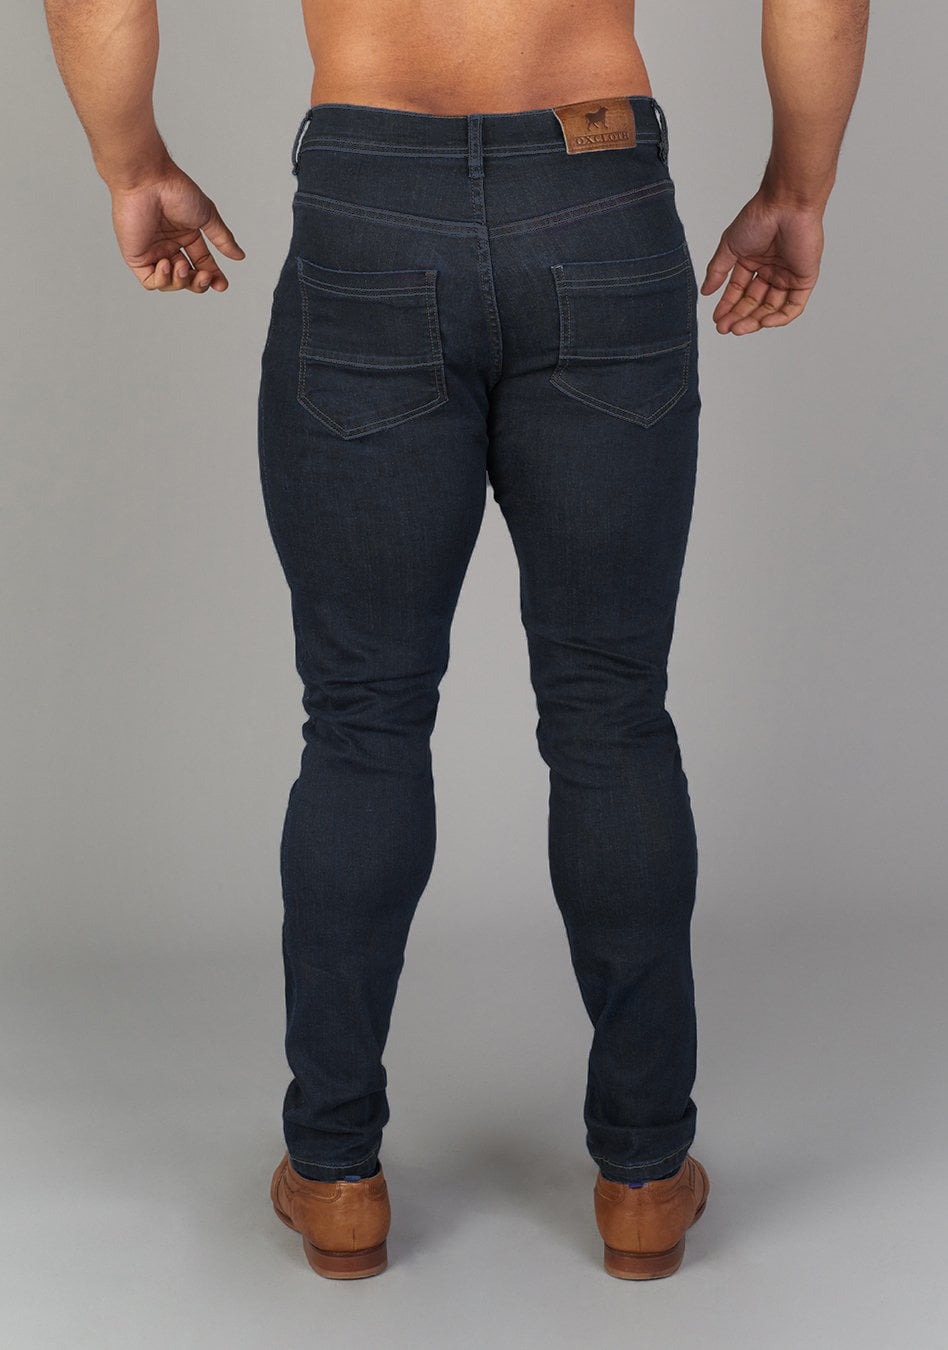 Bluejay Athletic Fit Stretch Jeans - 74.99 - Oxcloth - Bottoms muscle-fit for bodybuilders and athletes